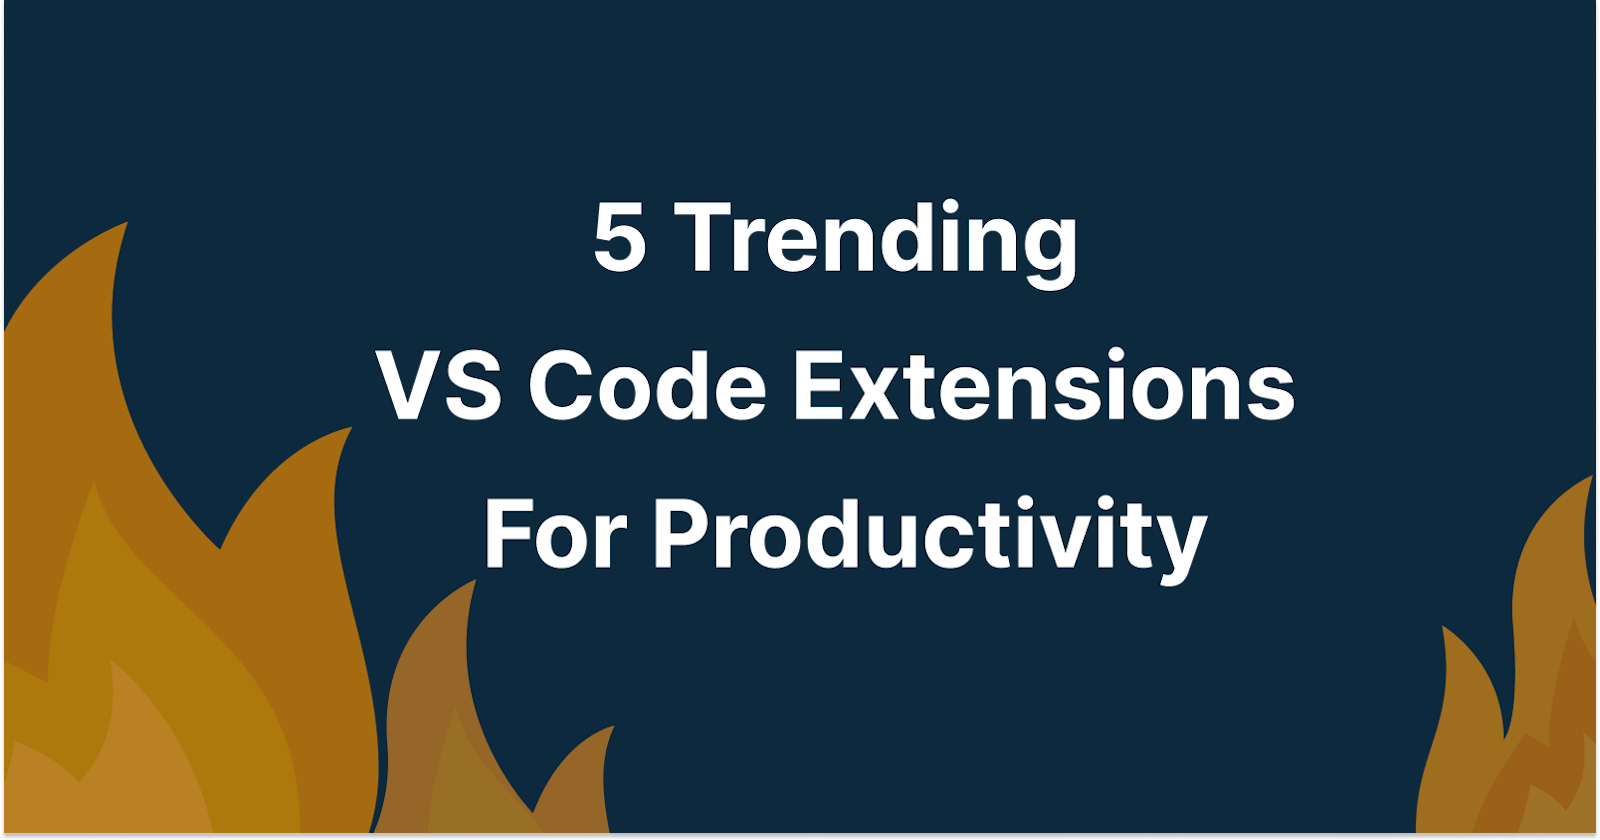 5 Trending VS Code Extensions For Productivity